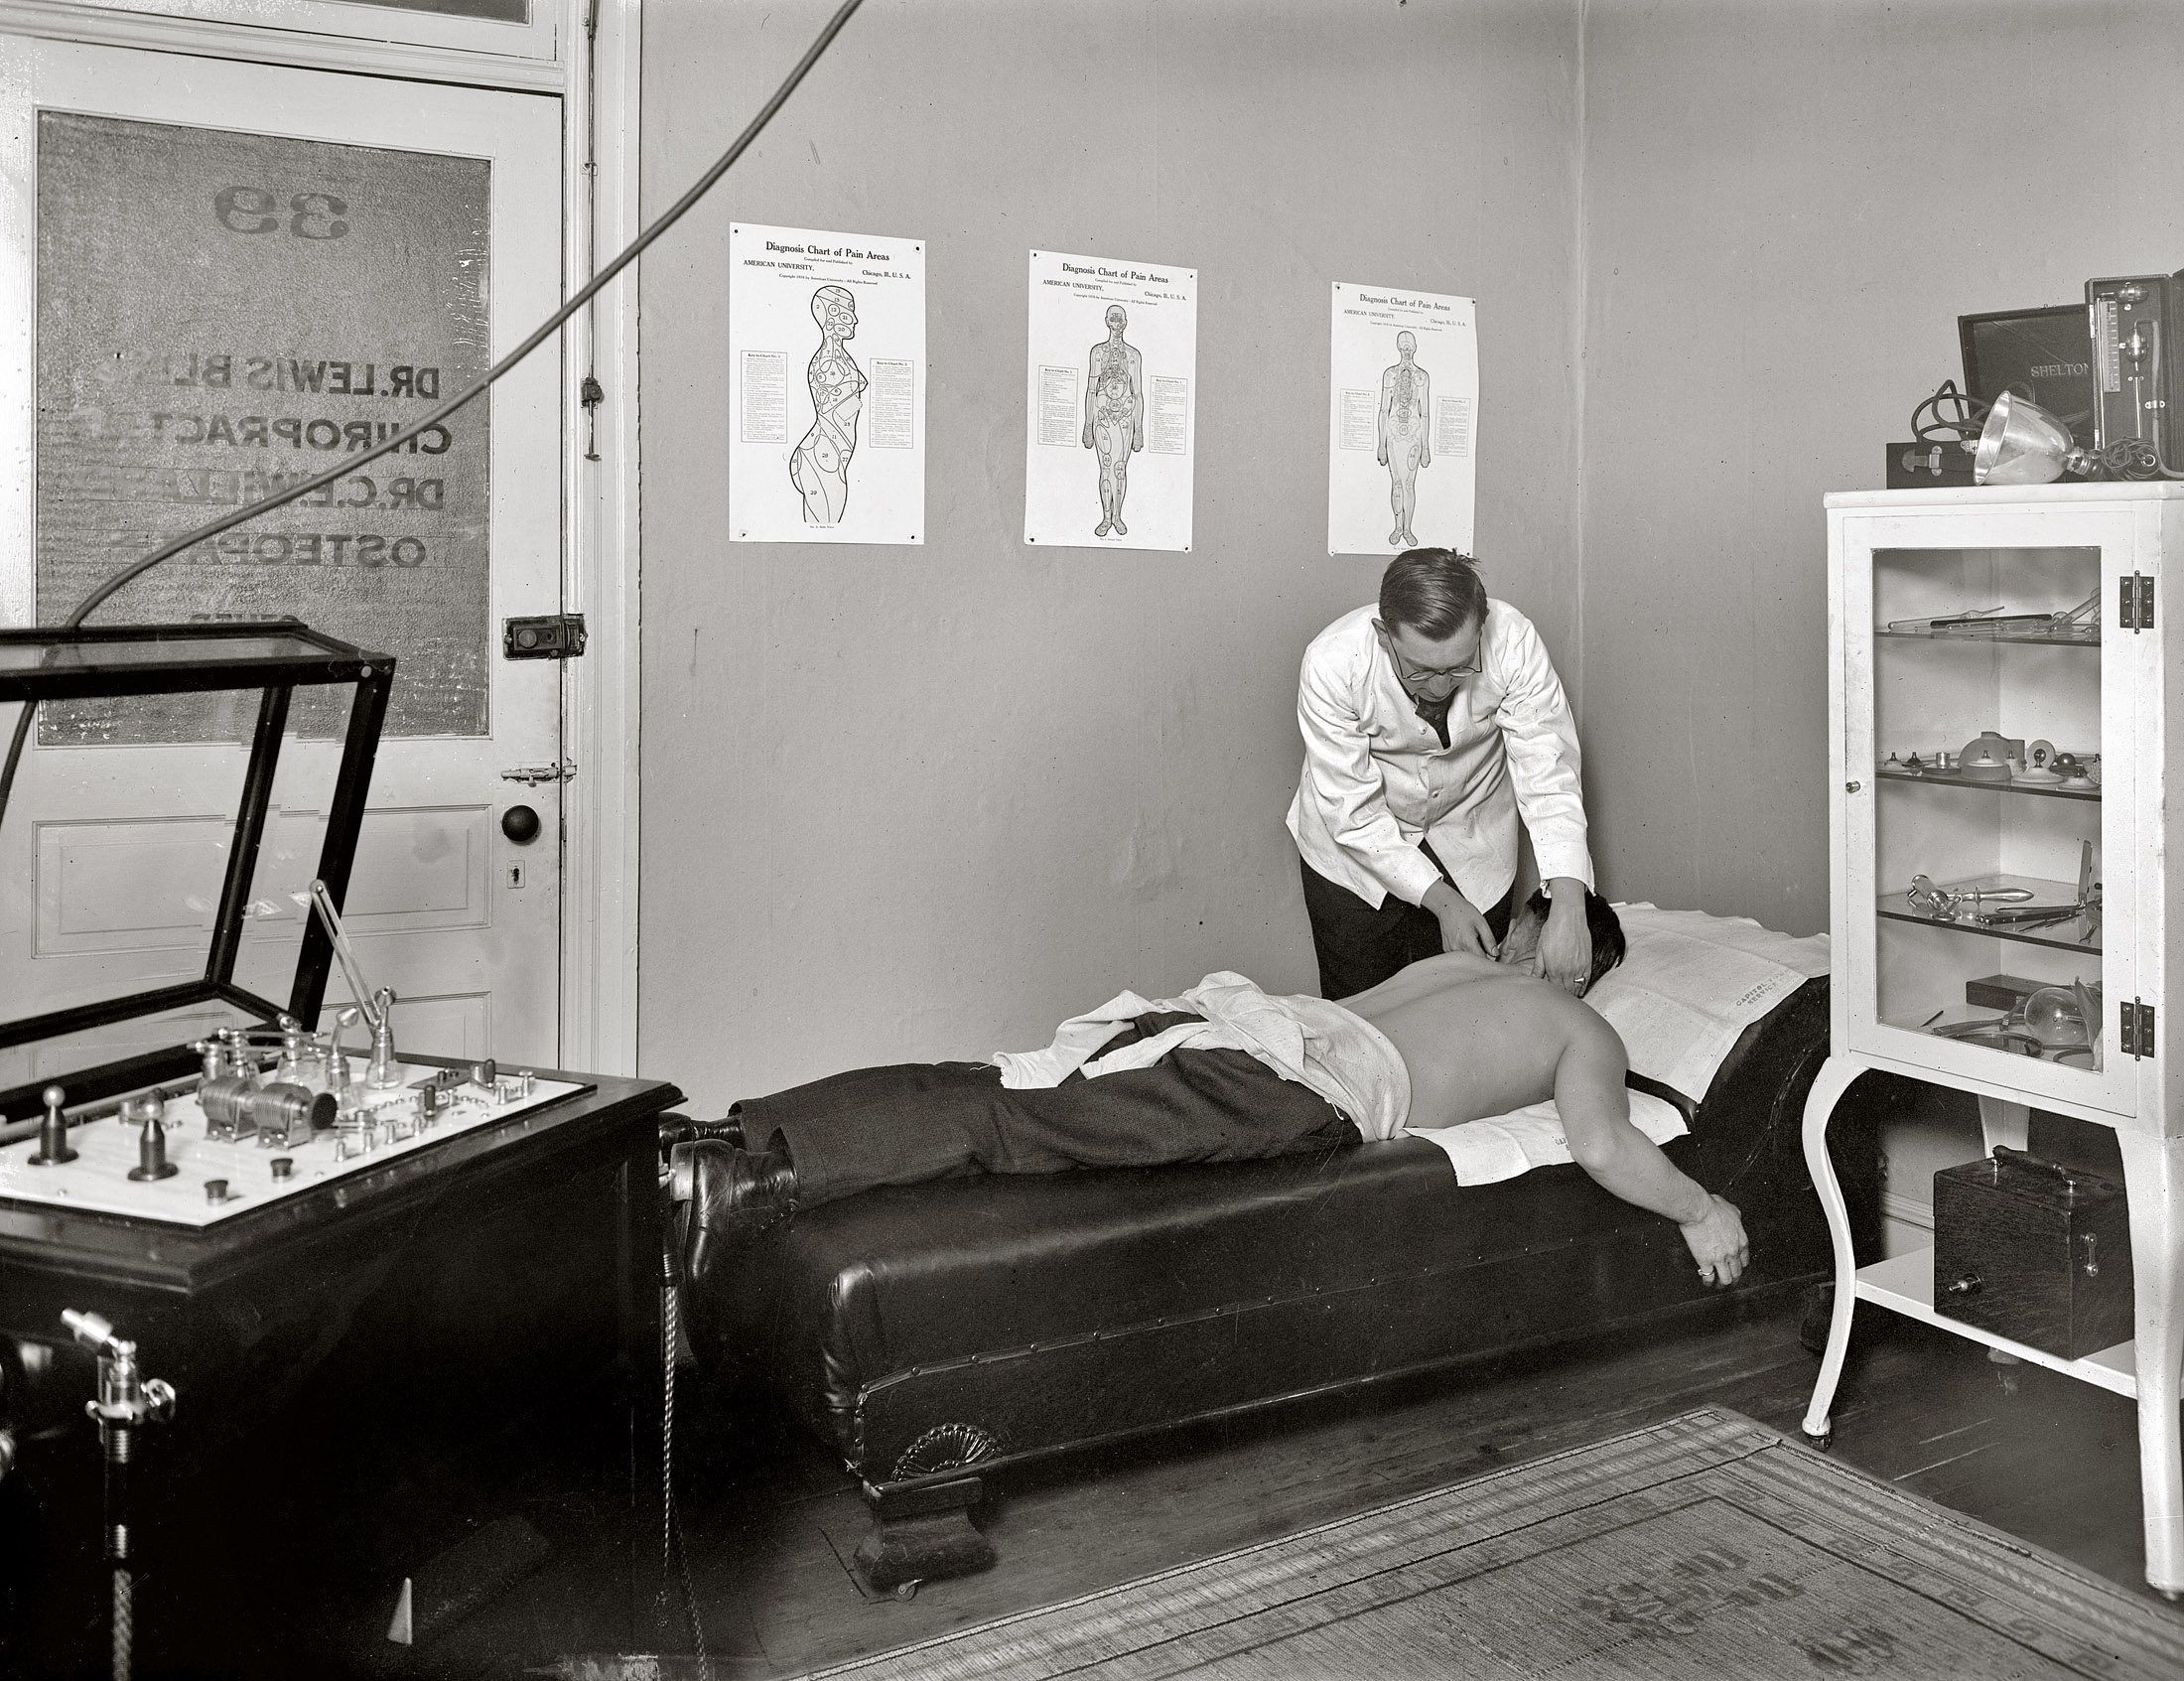 Washington, D.C., circa 1920. "Dr. Bliss, interior, 13th and G streets." National Photo Company Collection glass negative. View full size.